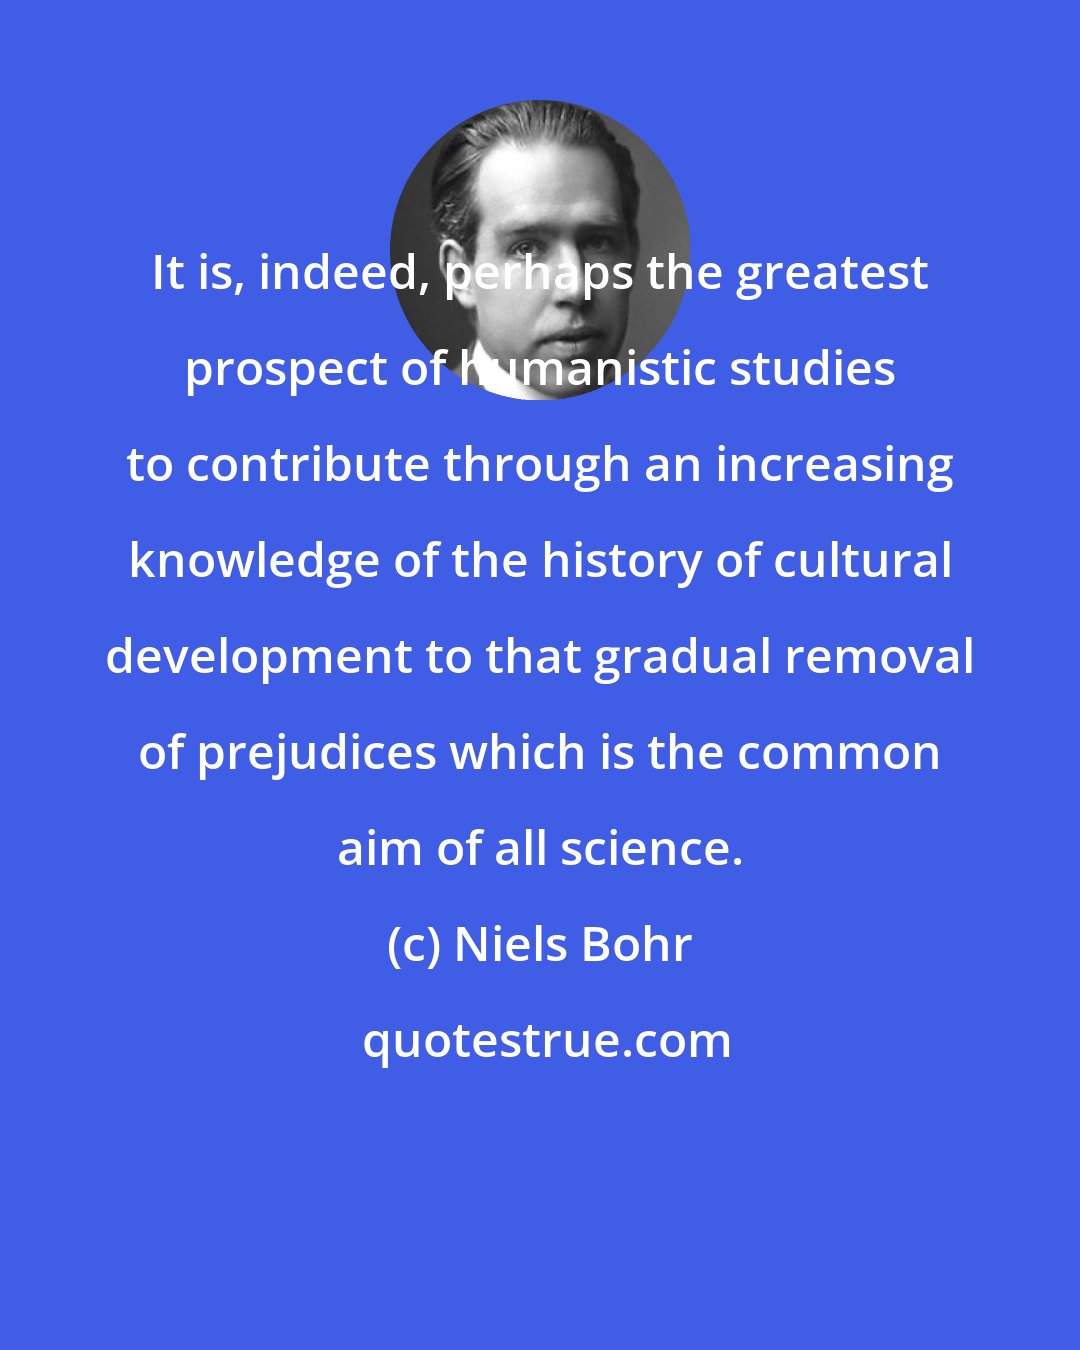 Niels Bohr: It is, indeed, perhaps the greatest prospect of humanistic studies to contribute through an increasing knowledge of the history of cultural development to that gradual removal of prejudices which is the common aim of all science.